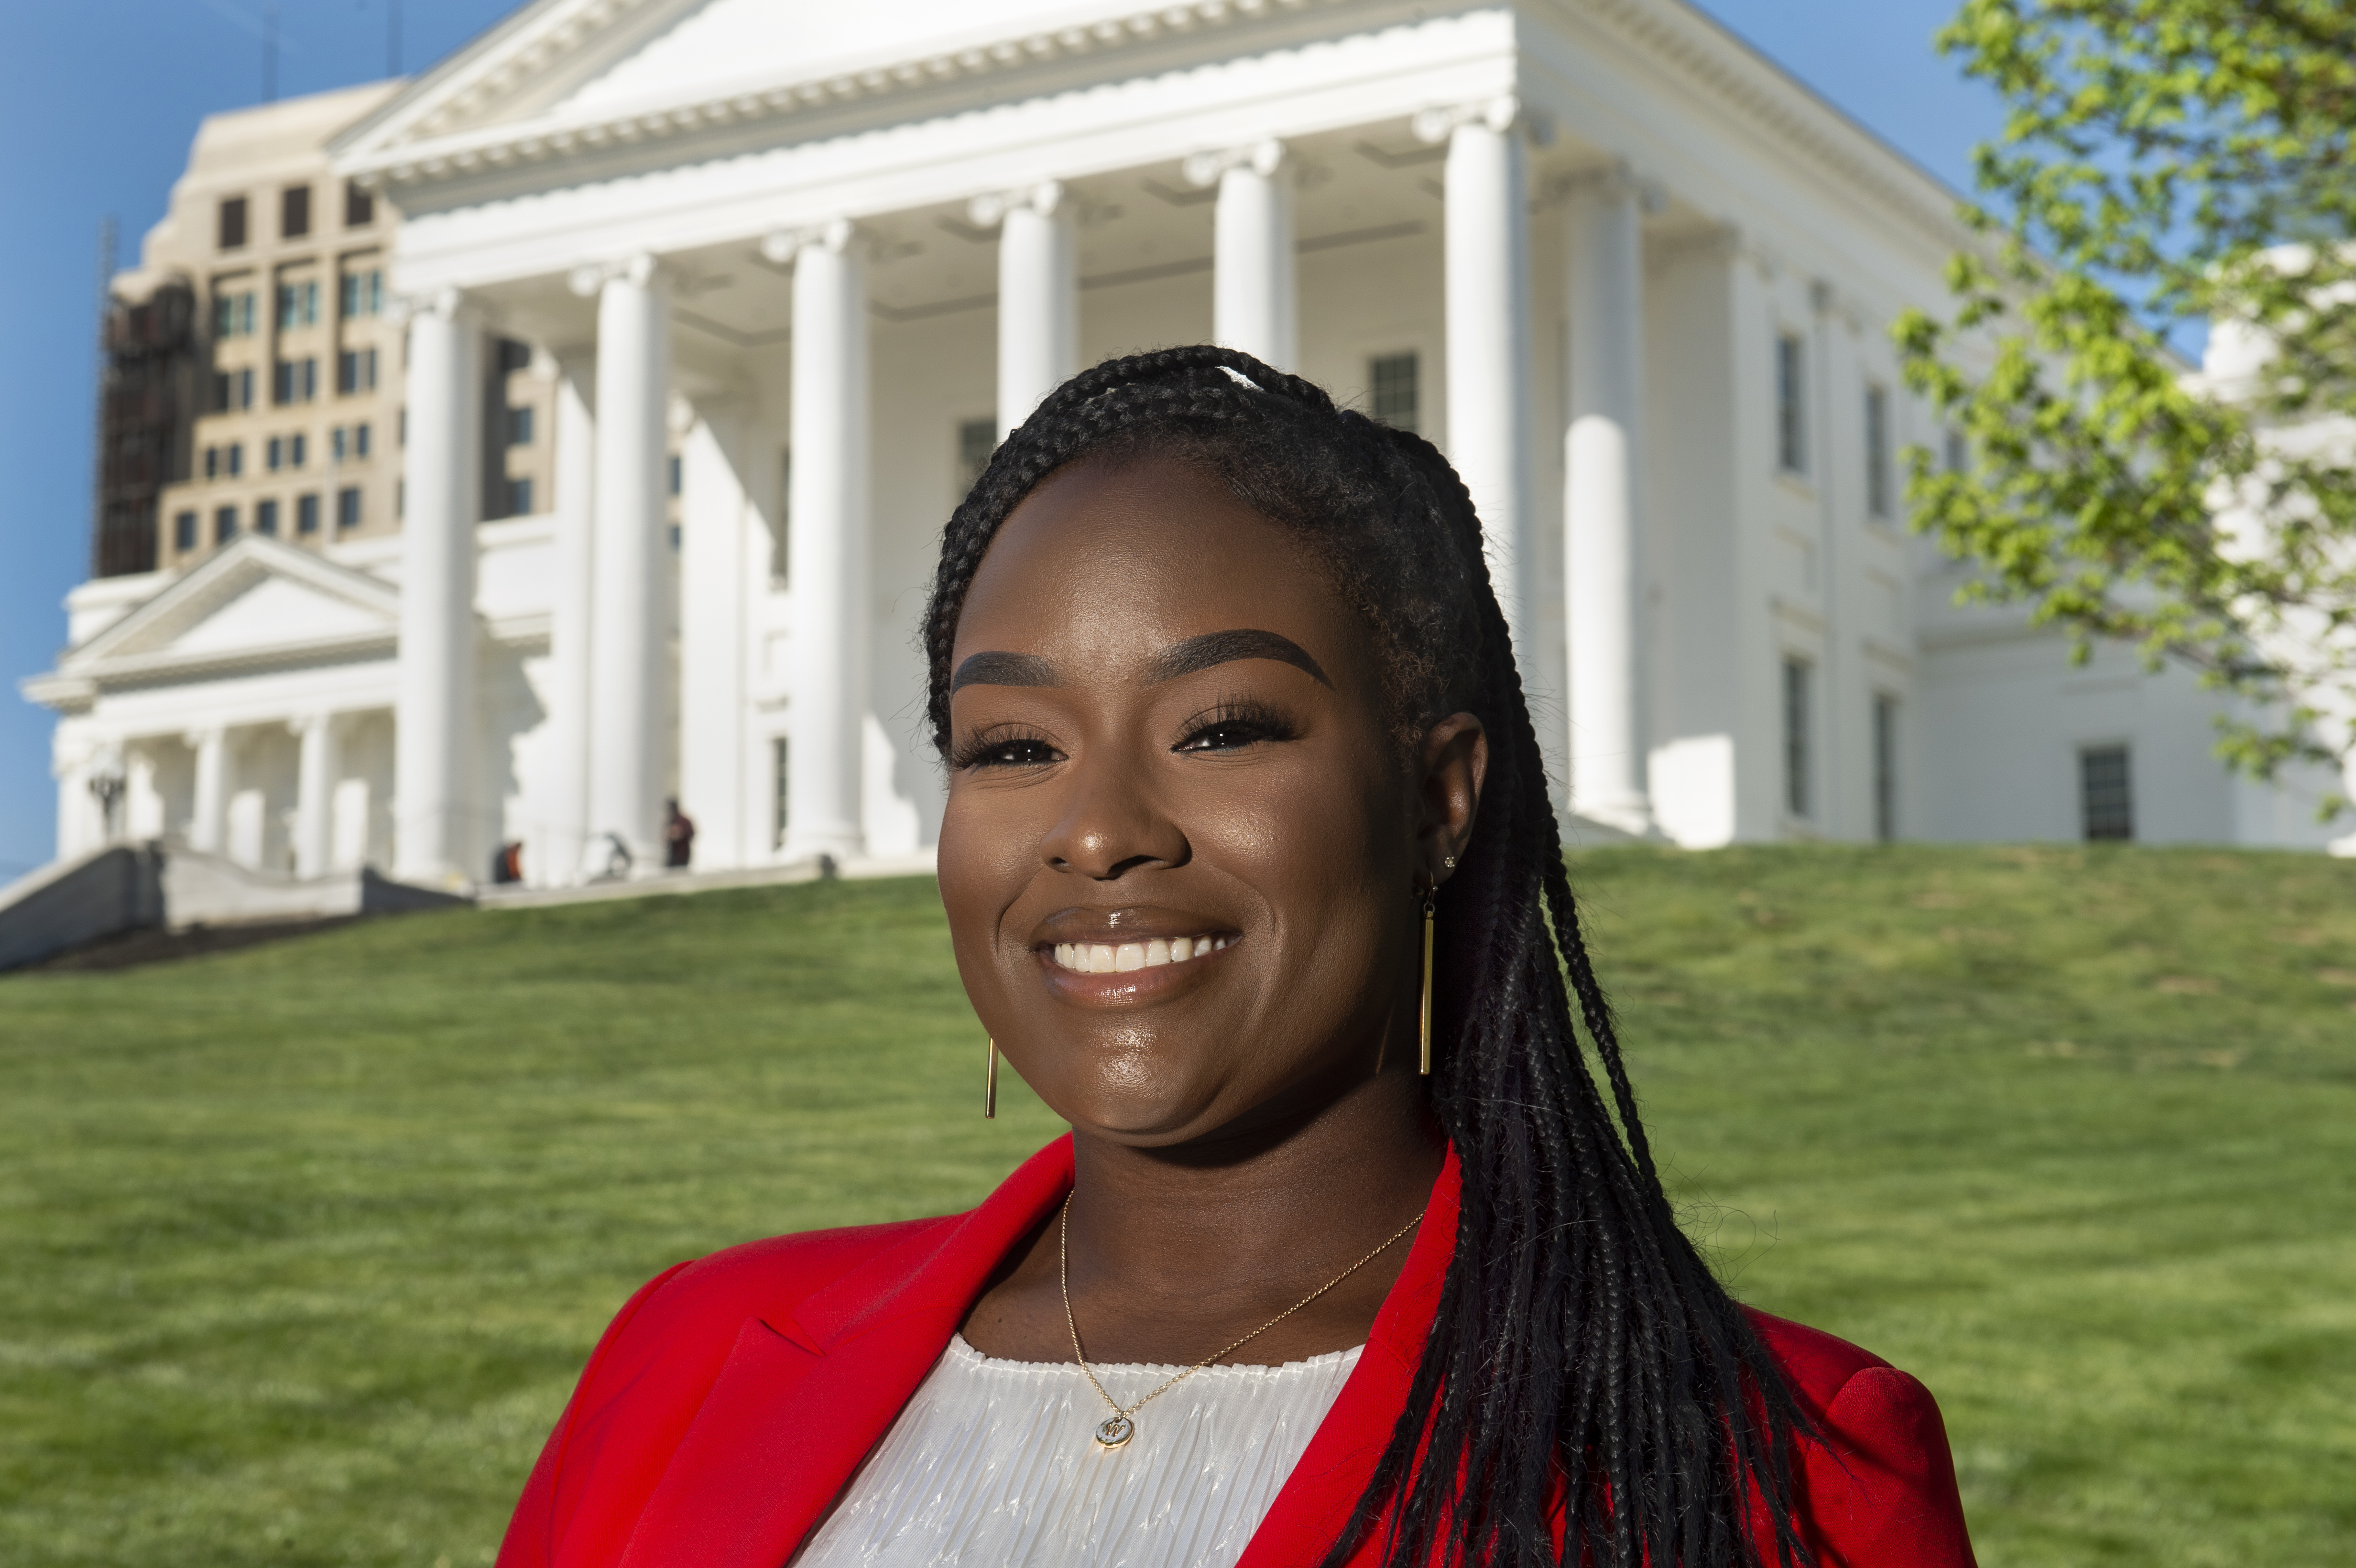 As an M.P.A. graduate student at the VCU Wilder School of Government and Public Affairs, Brown transforms her passion for social equity into action.